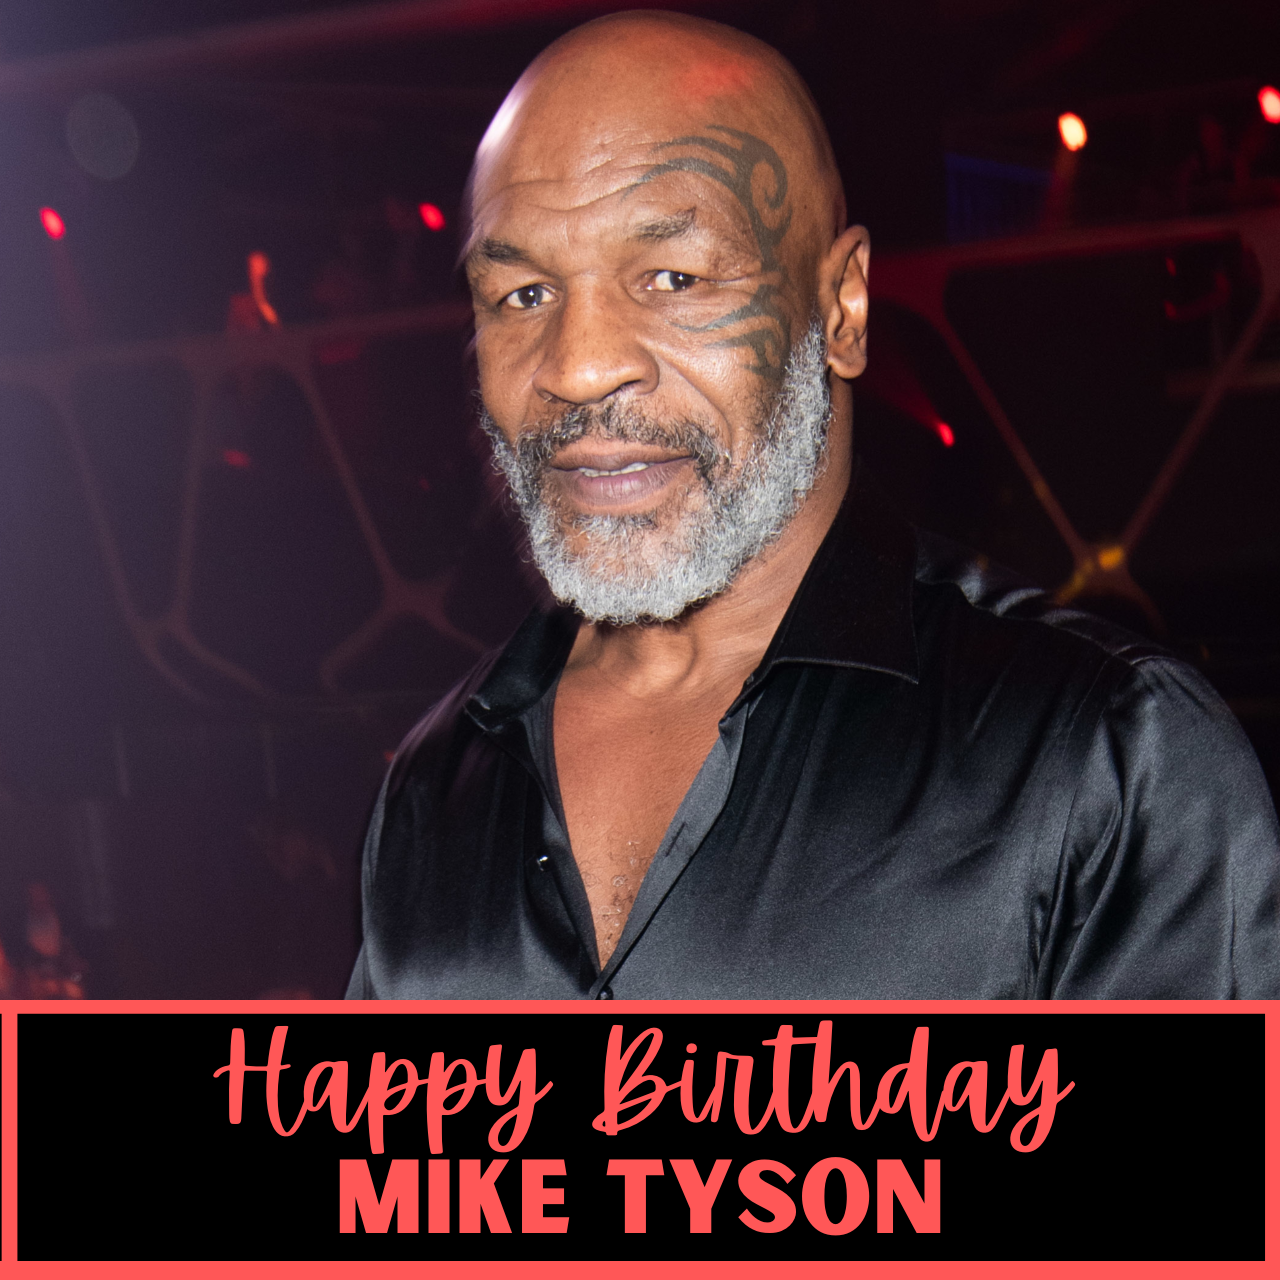 Happy Birthday Mike Tyson: Wishes, Quotes, Images, Messages, Greetings, and memes to greet 'the Baddest man on the planet'